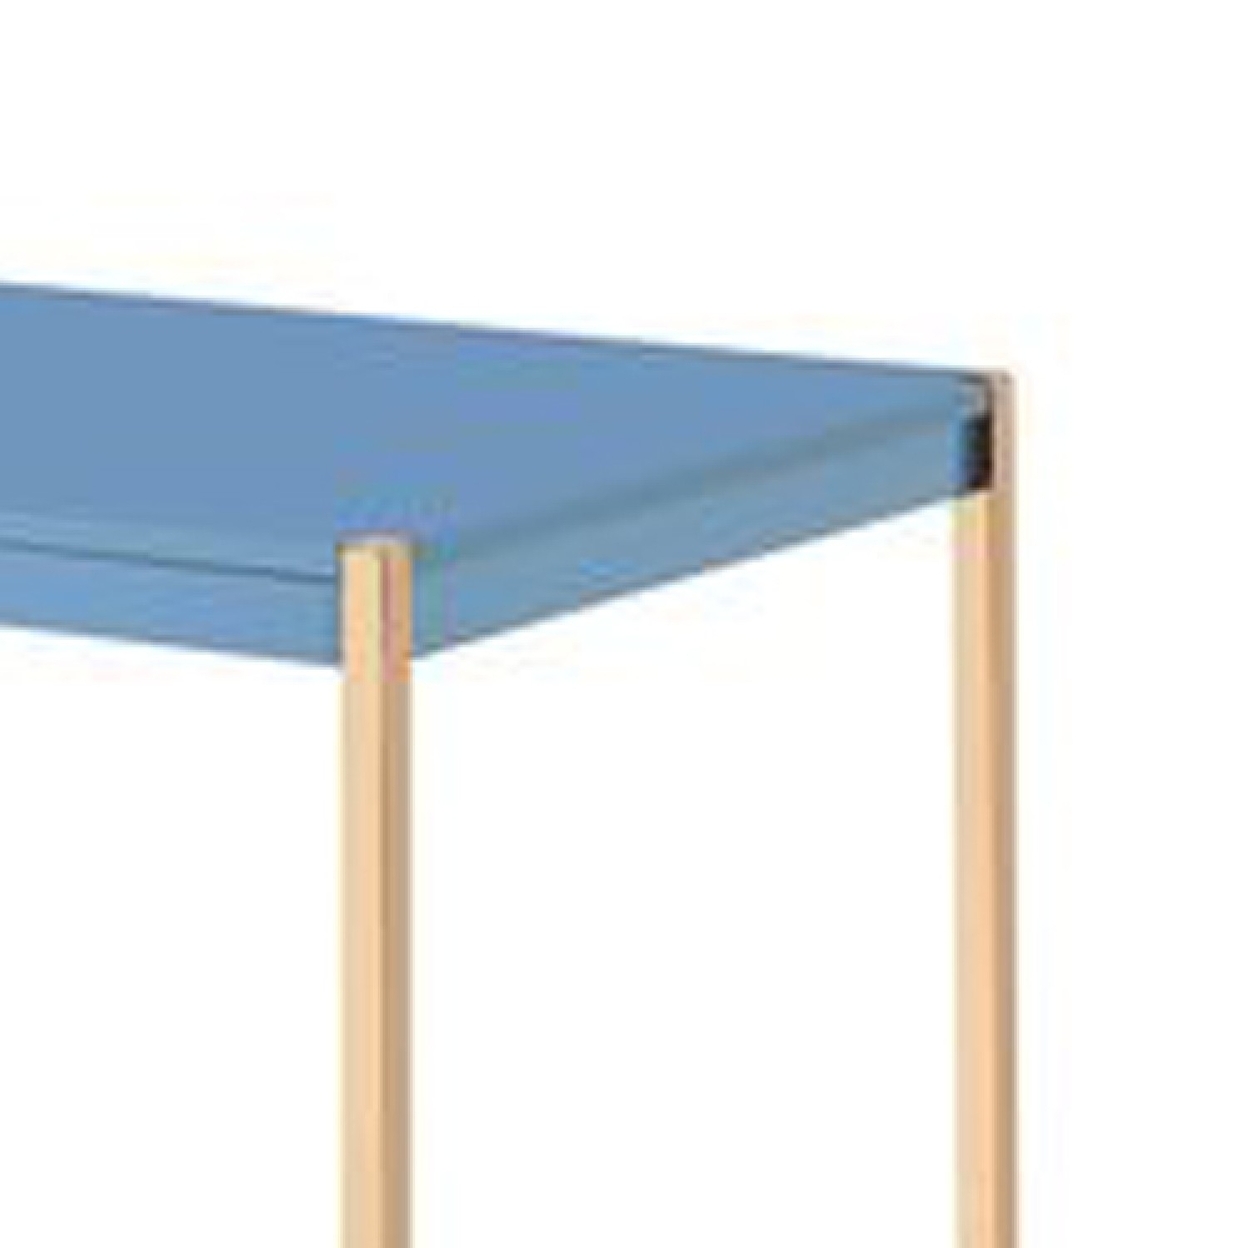 Writing Desk With USB Dock And Metal Legs, Blue And Rose Gold- Saltoro Sherpi